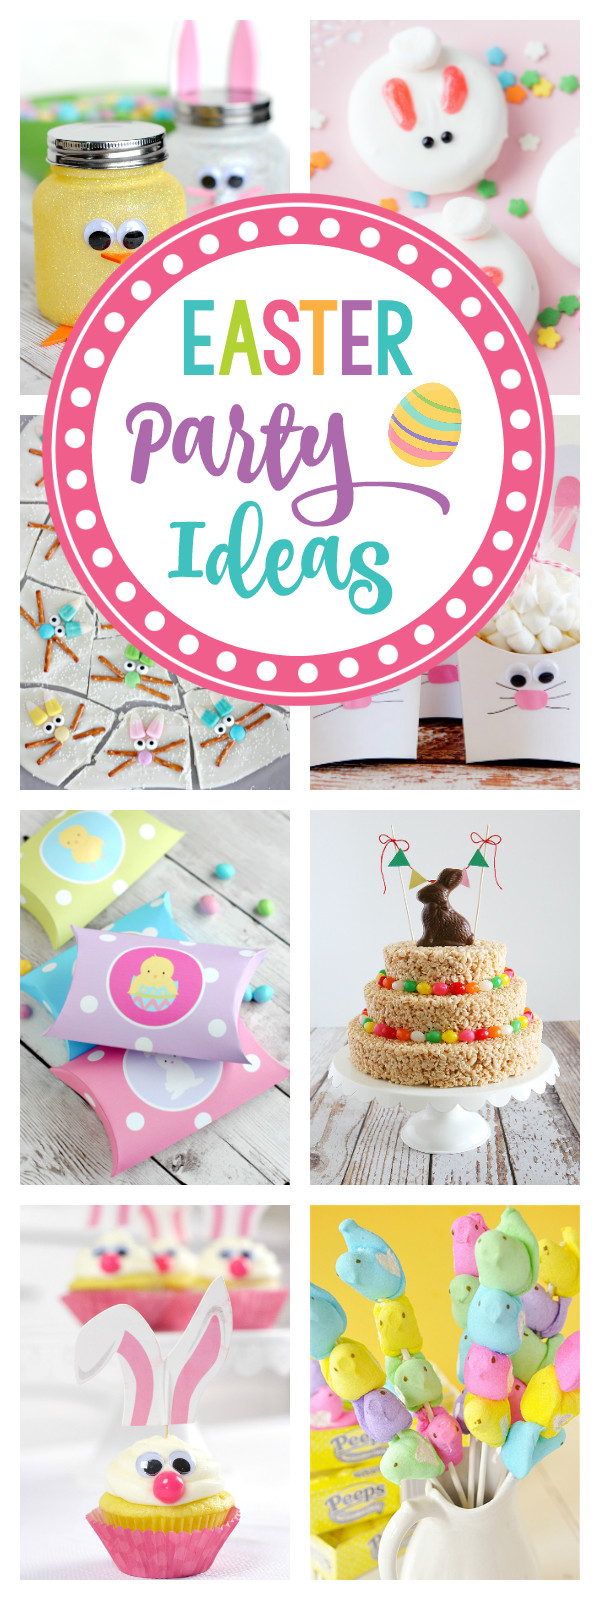 Easter Kid Party Ideas
 25 Fun Easter Party Ideas for Kids – Fun Squared